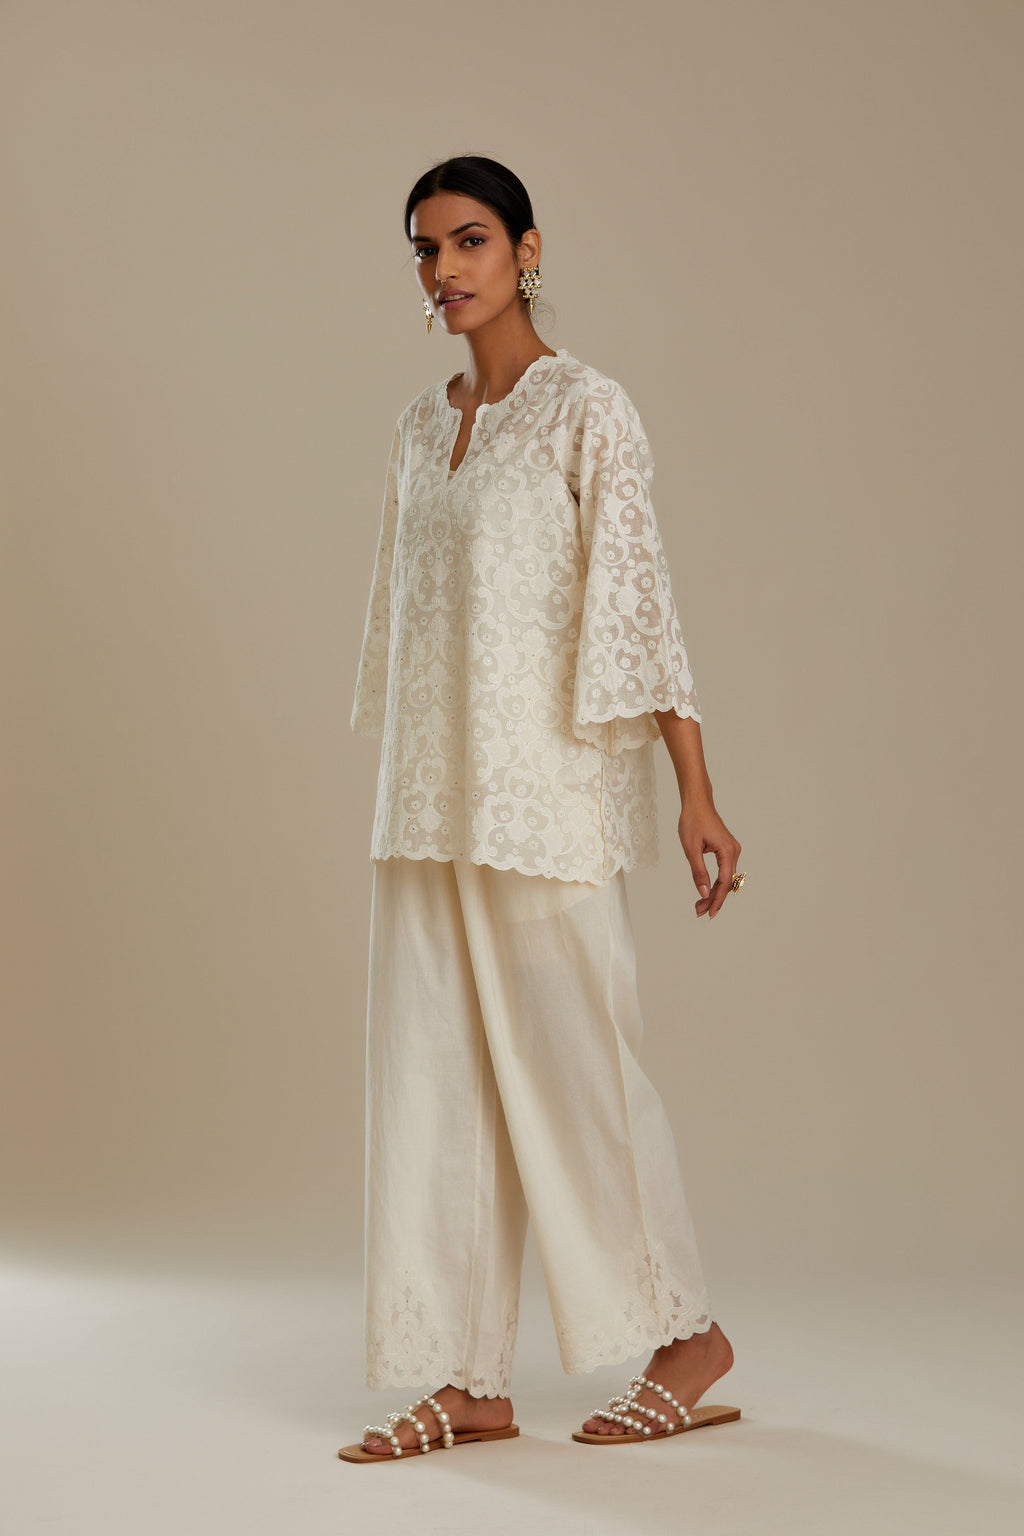 Off white cotton chanderi short top with all-over appliqué, highlighted with sequin, paired with off white cotton straight pants with appliqué detail at hem, highlighted with sequins.